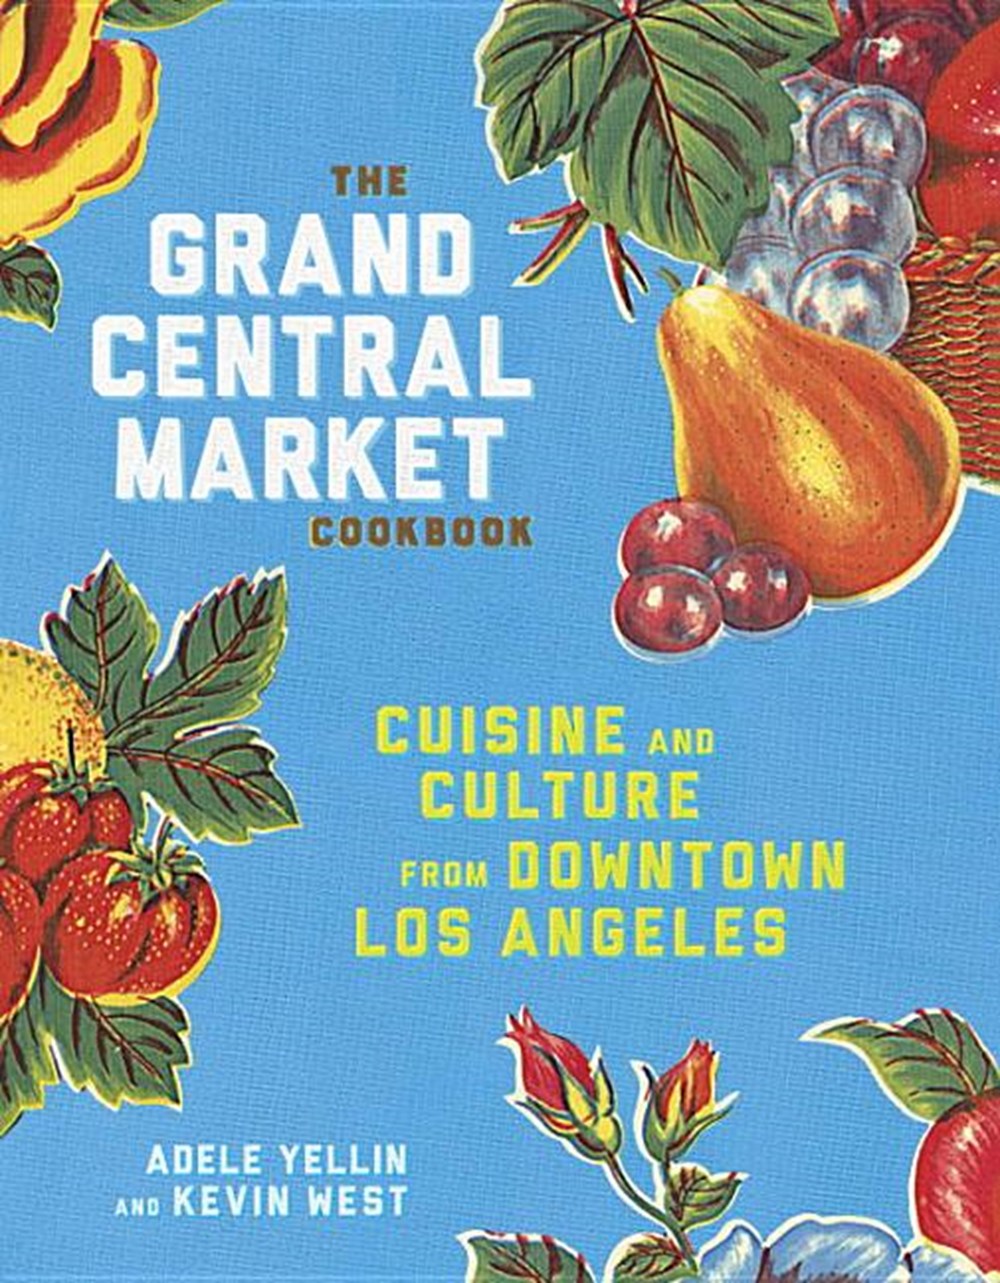 Grand Central Market Cookbook: Cuisine and Culture from Downtown Los Angeles